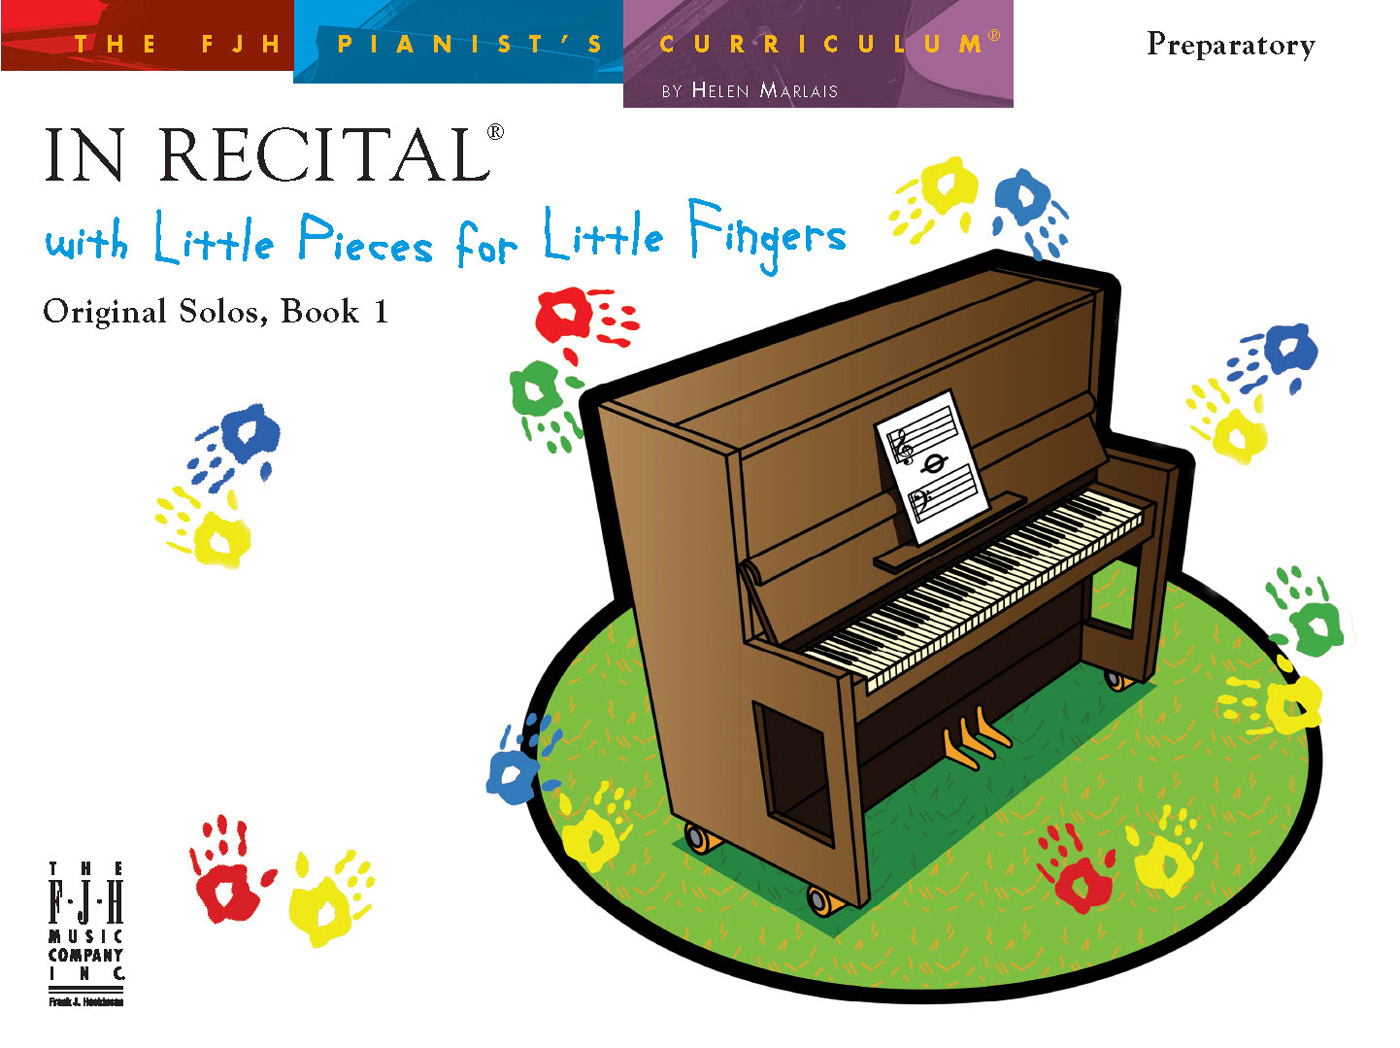 FJH  Marlais  In Recital with Little Pieces for Little Fingers - Original Solos Book 1 - Preparatory